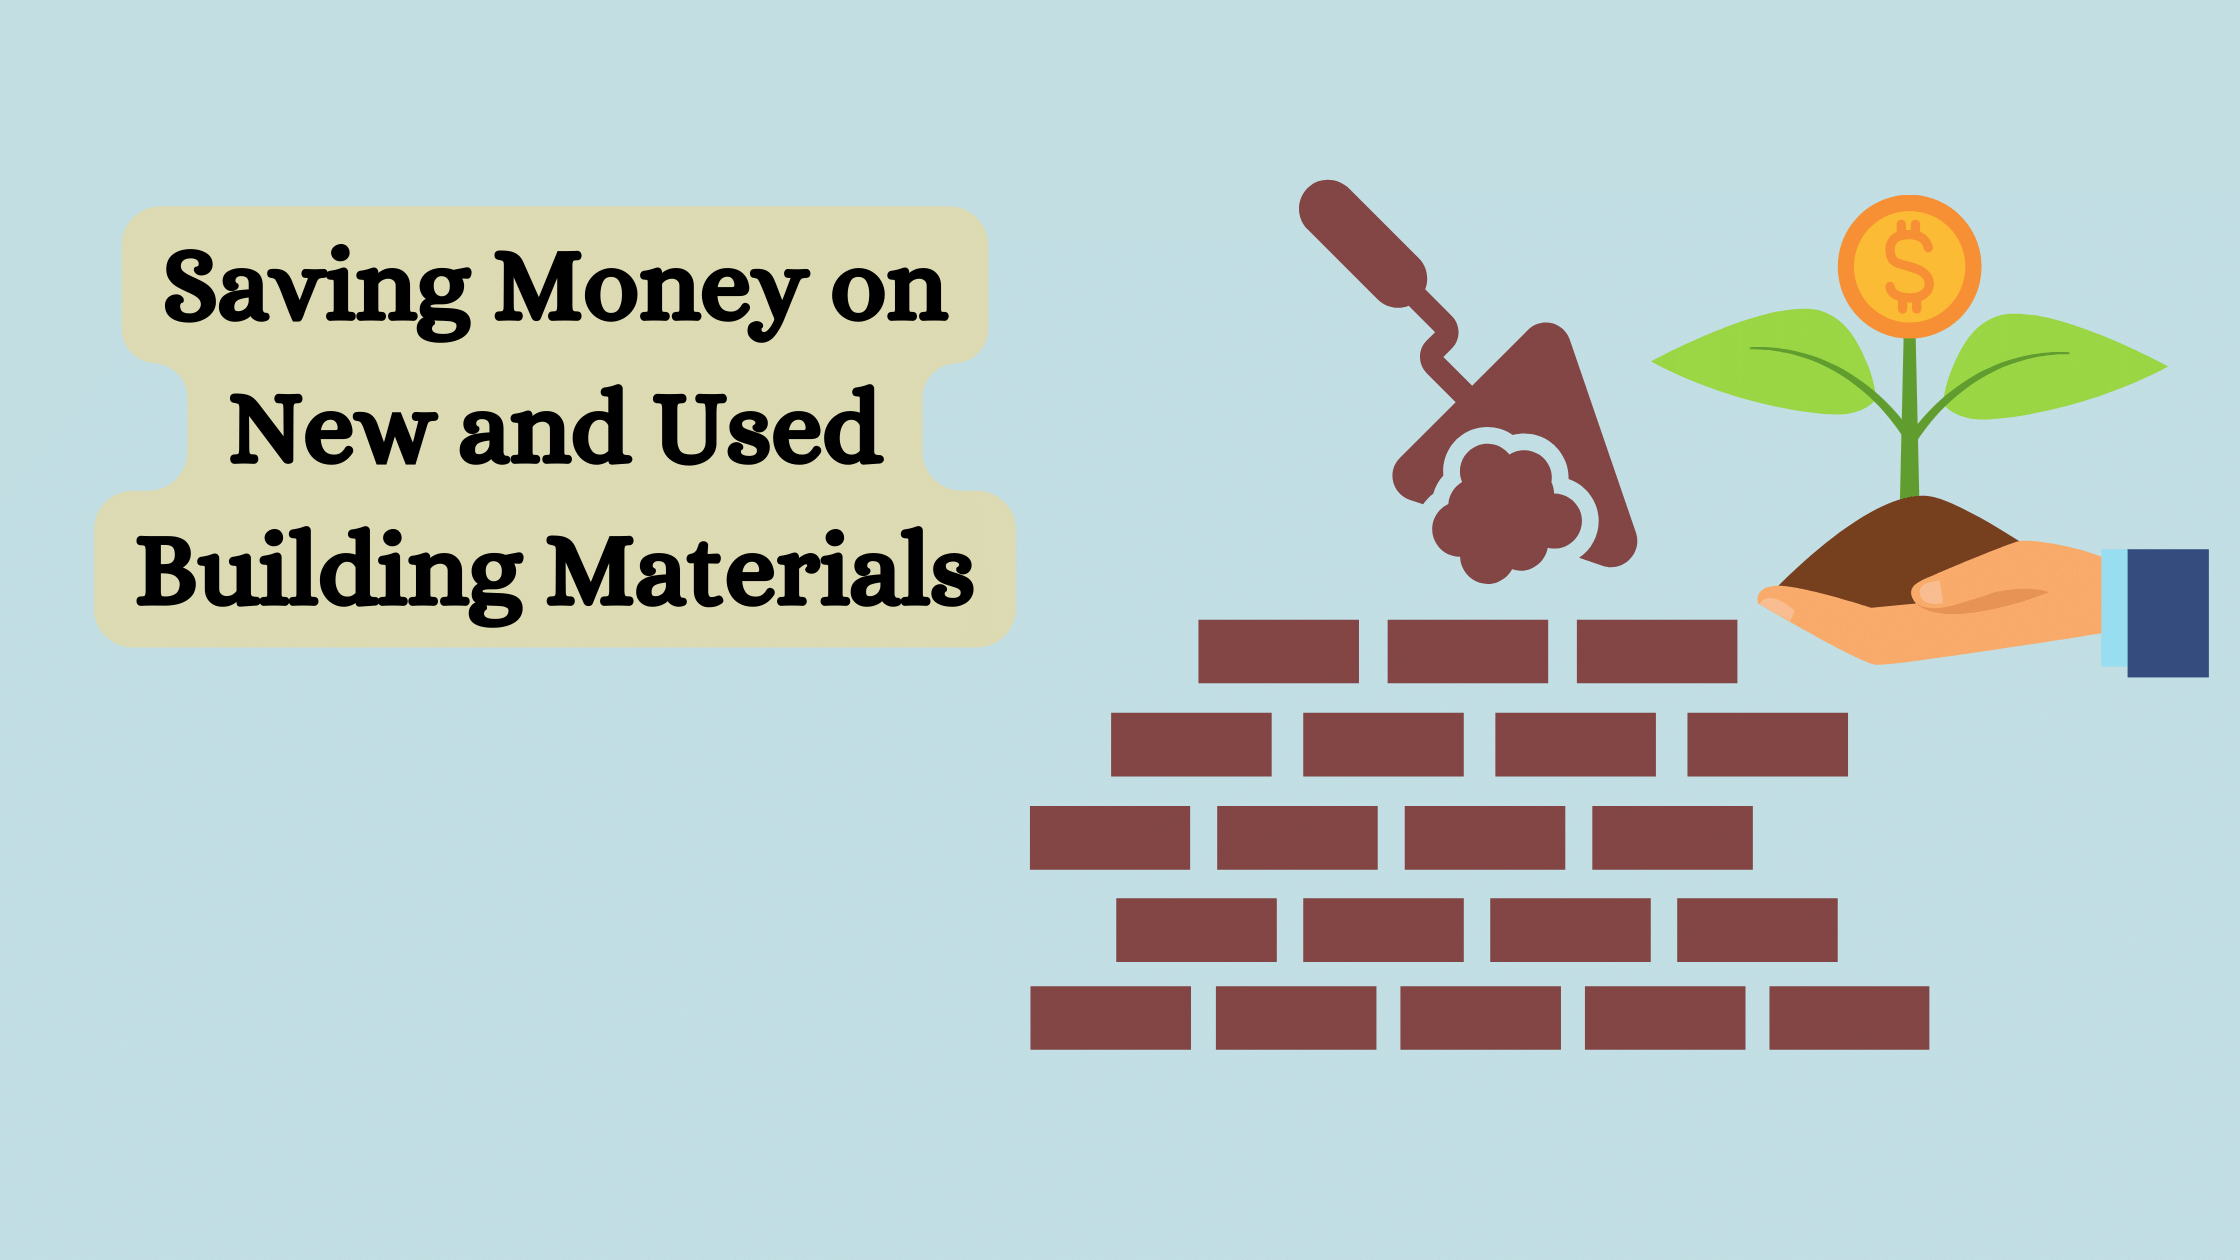 Saving Money on New and Used Building Materials